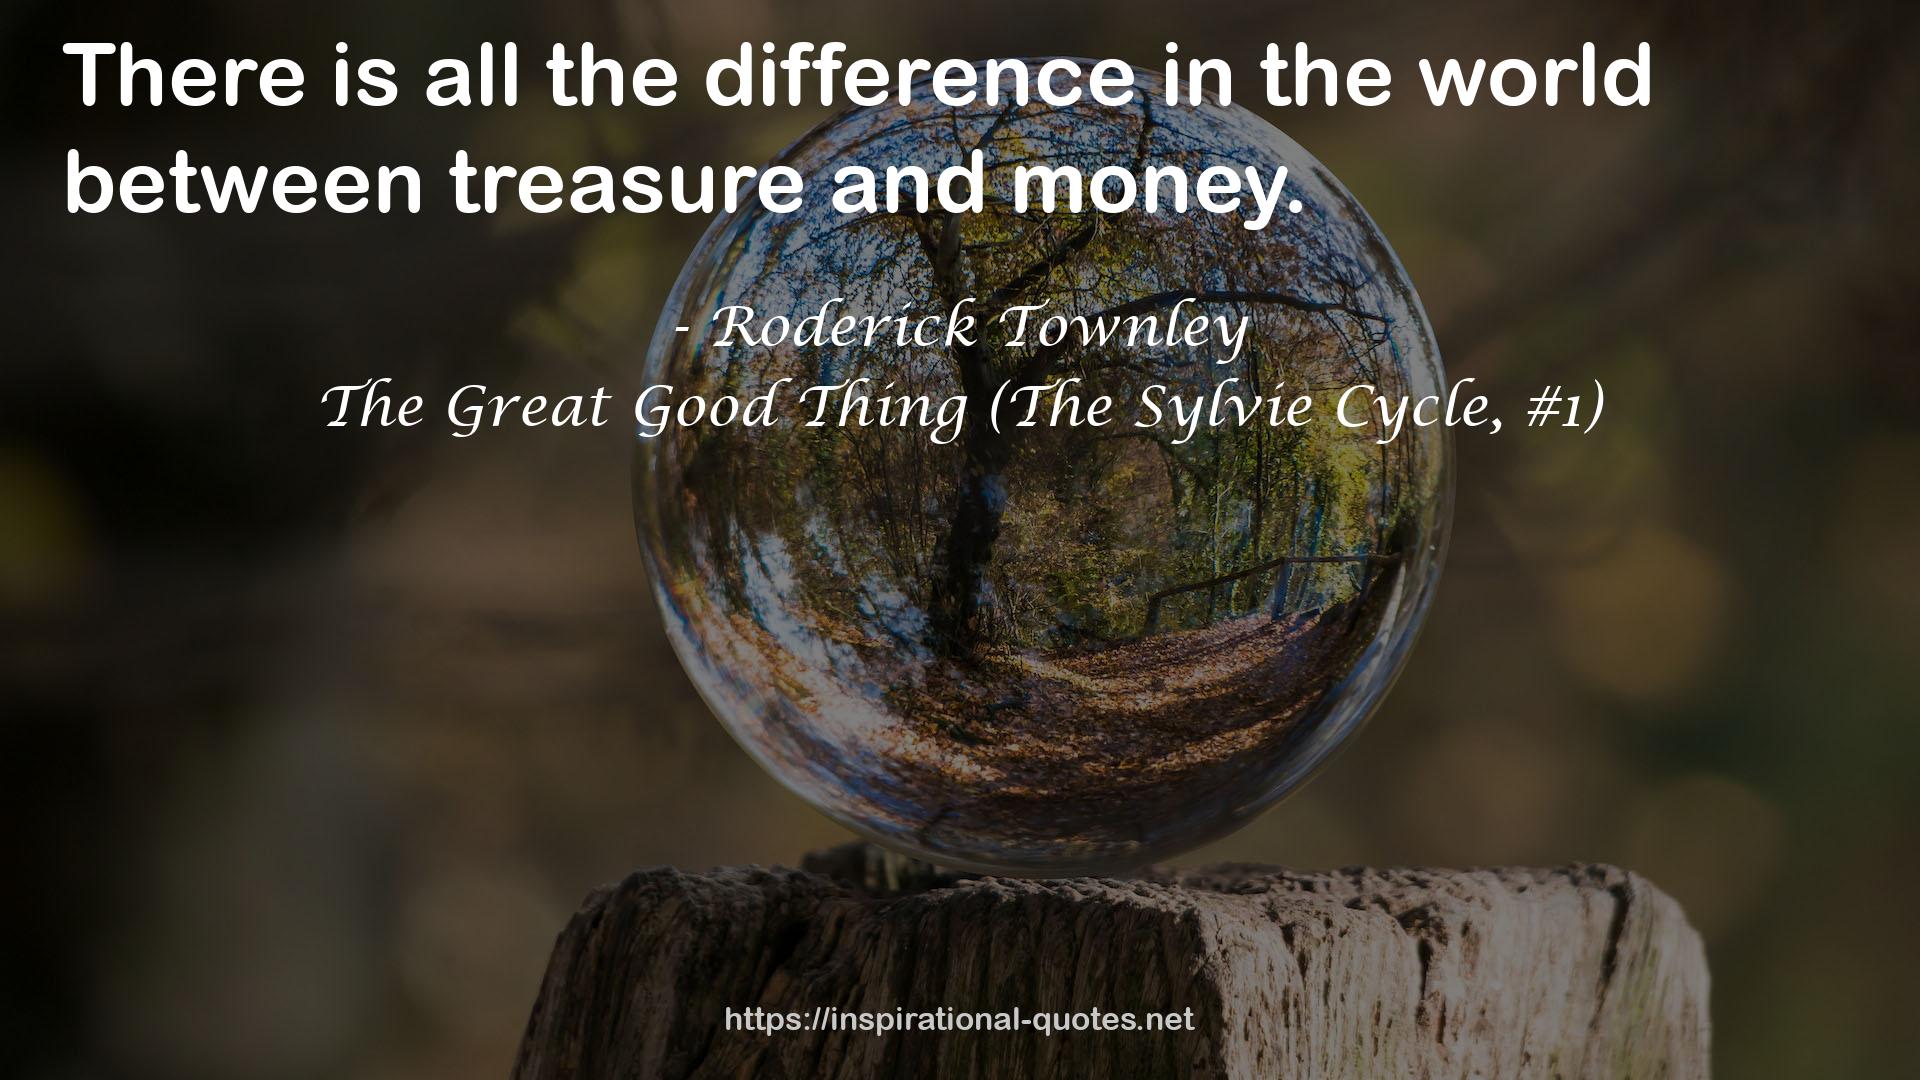 The Great Good Thing (The Sylvie Cycle, #1) QUOTES